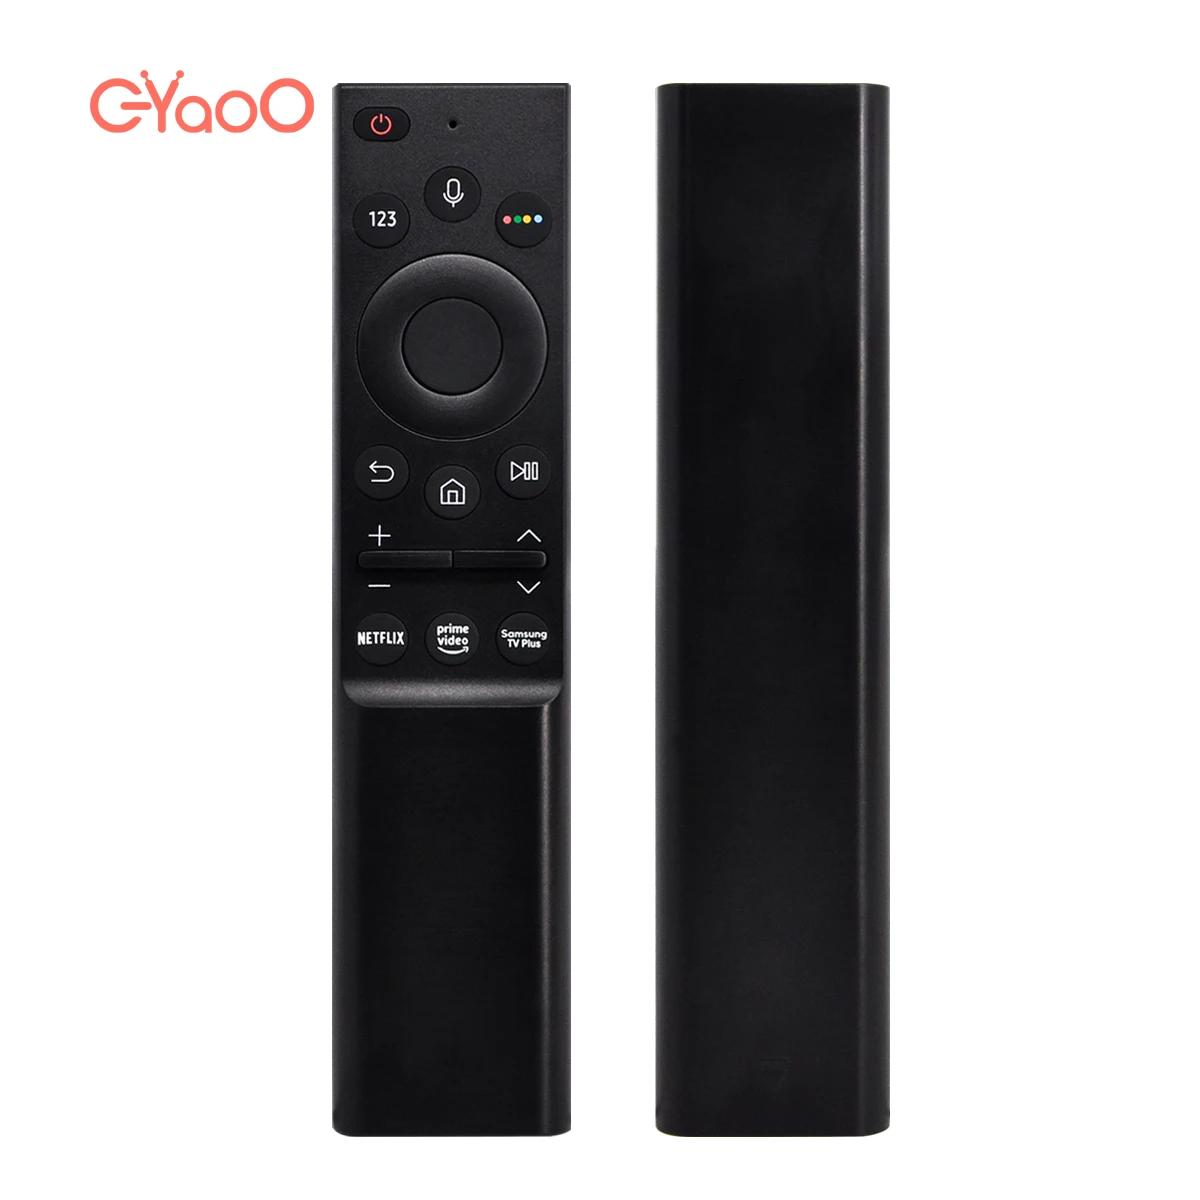 

BN59-01363J Samsung Voice Remote Control BN59-01363 Smart TV Replacement BN59-01263A Remote Compatible QLED Series BN59-01311